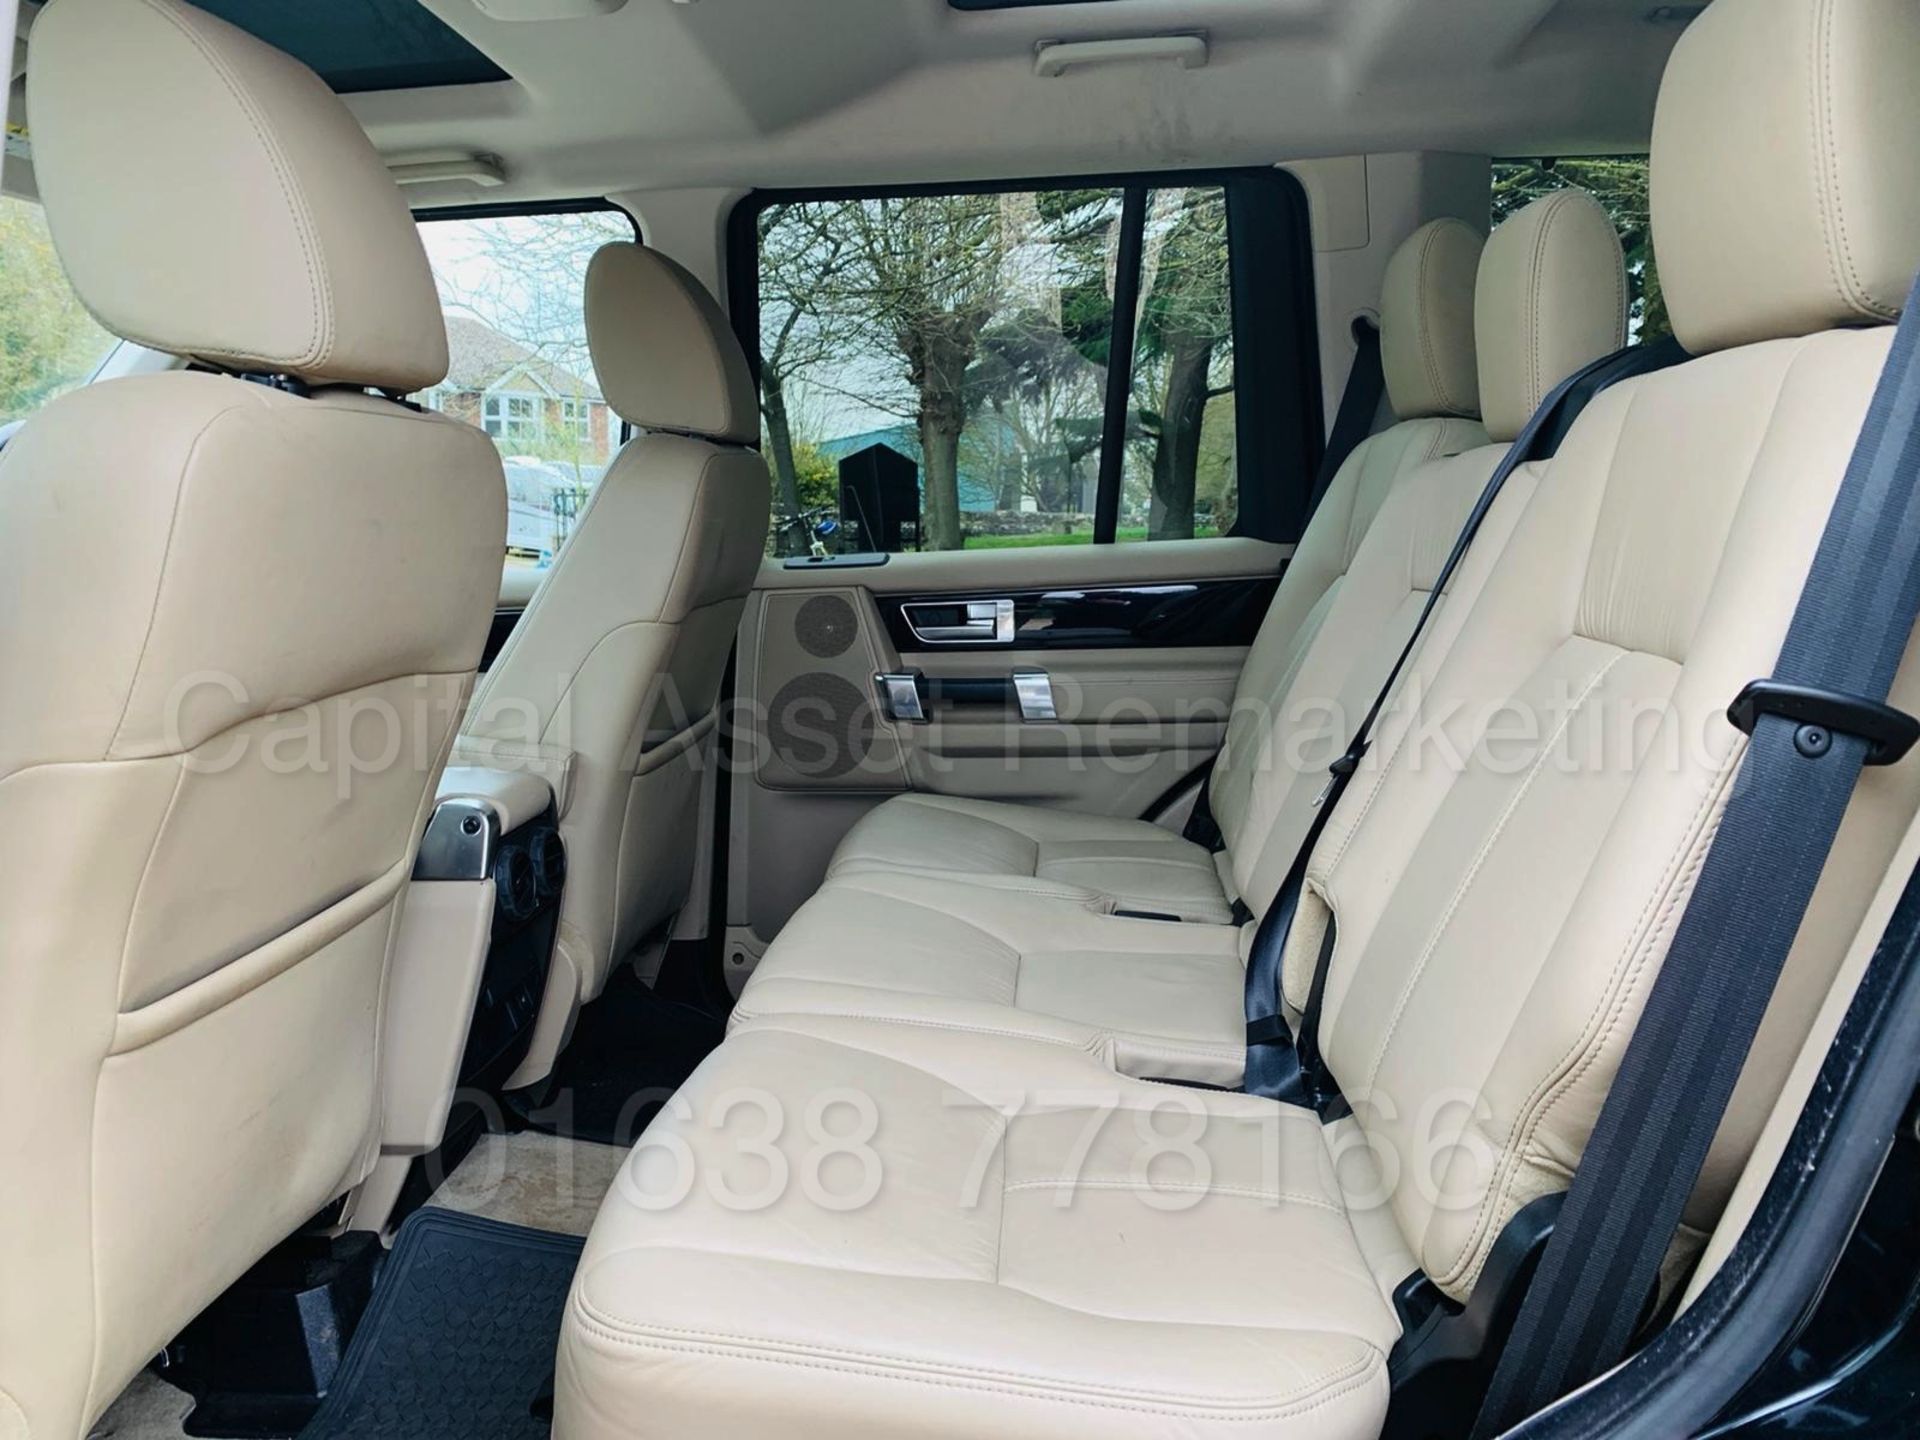 LAND ROVER DISCOVERY *HSE EDITION* 7 SEATER SUV (2012 MODEL) '3.0 SDV6- 8 SPEED AUTO' **HUGE SPEC** - Image 19 of 48